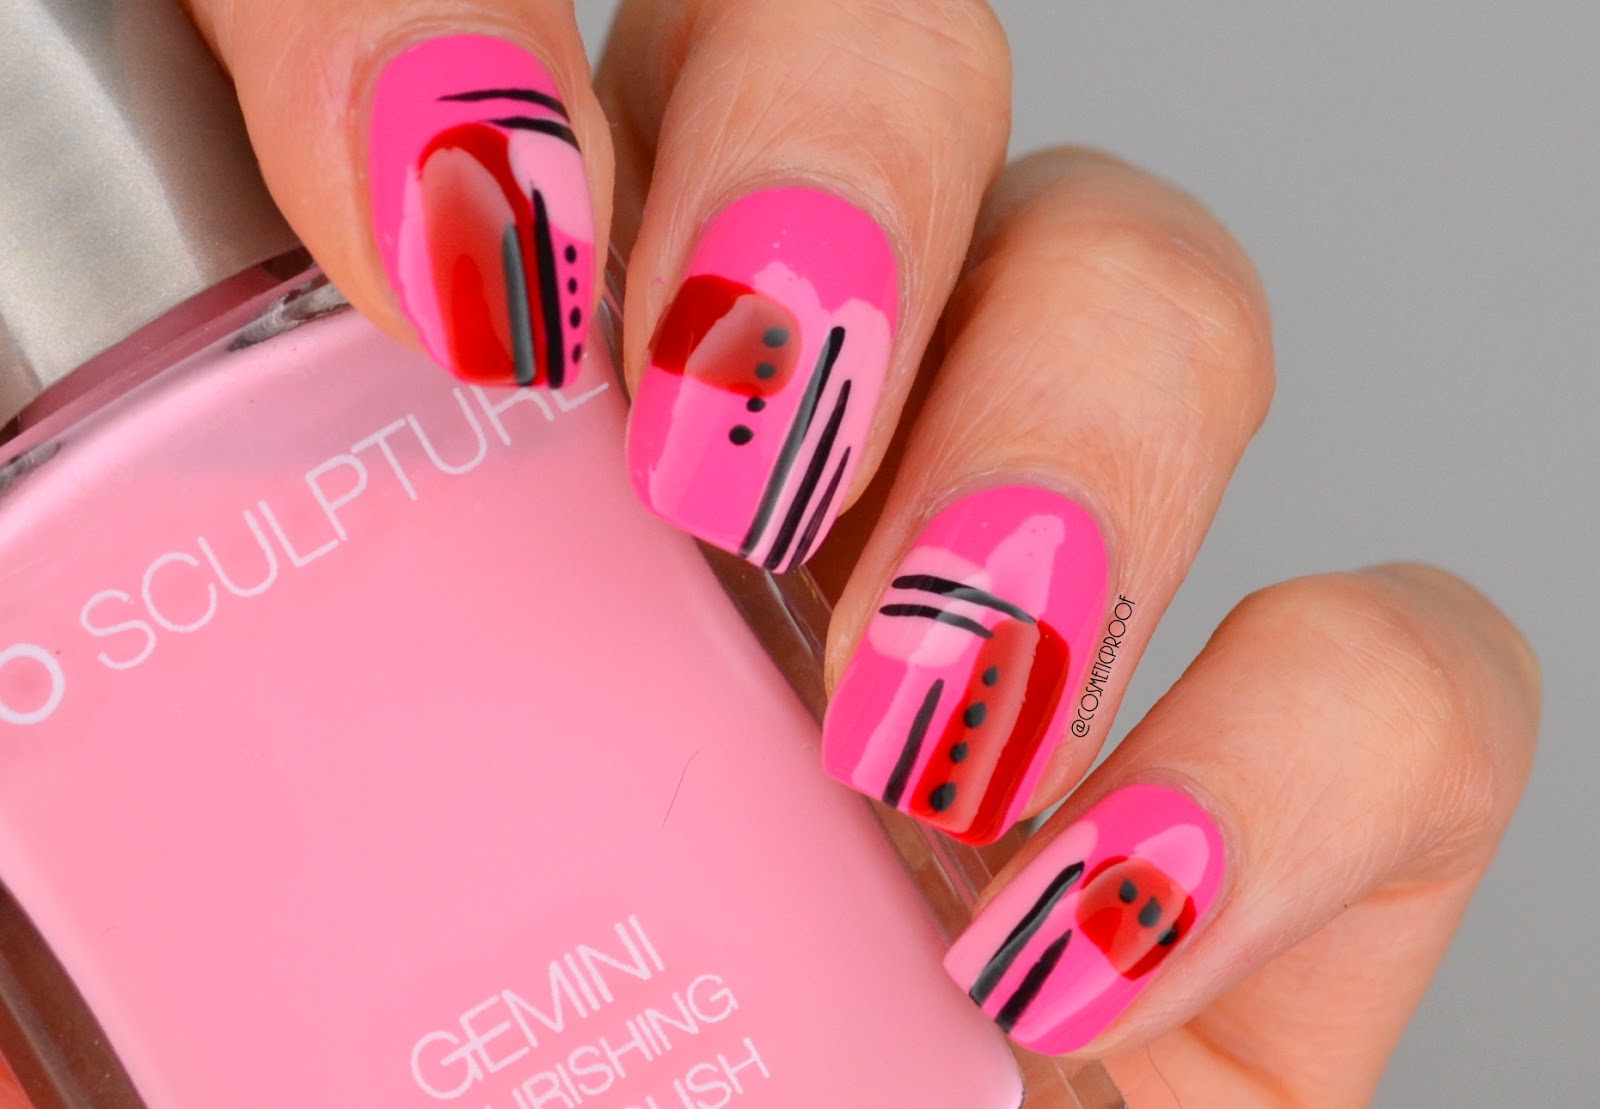 5. Abstract Nail Art Designs - wide 5